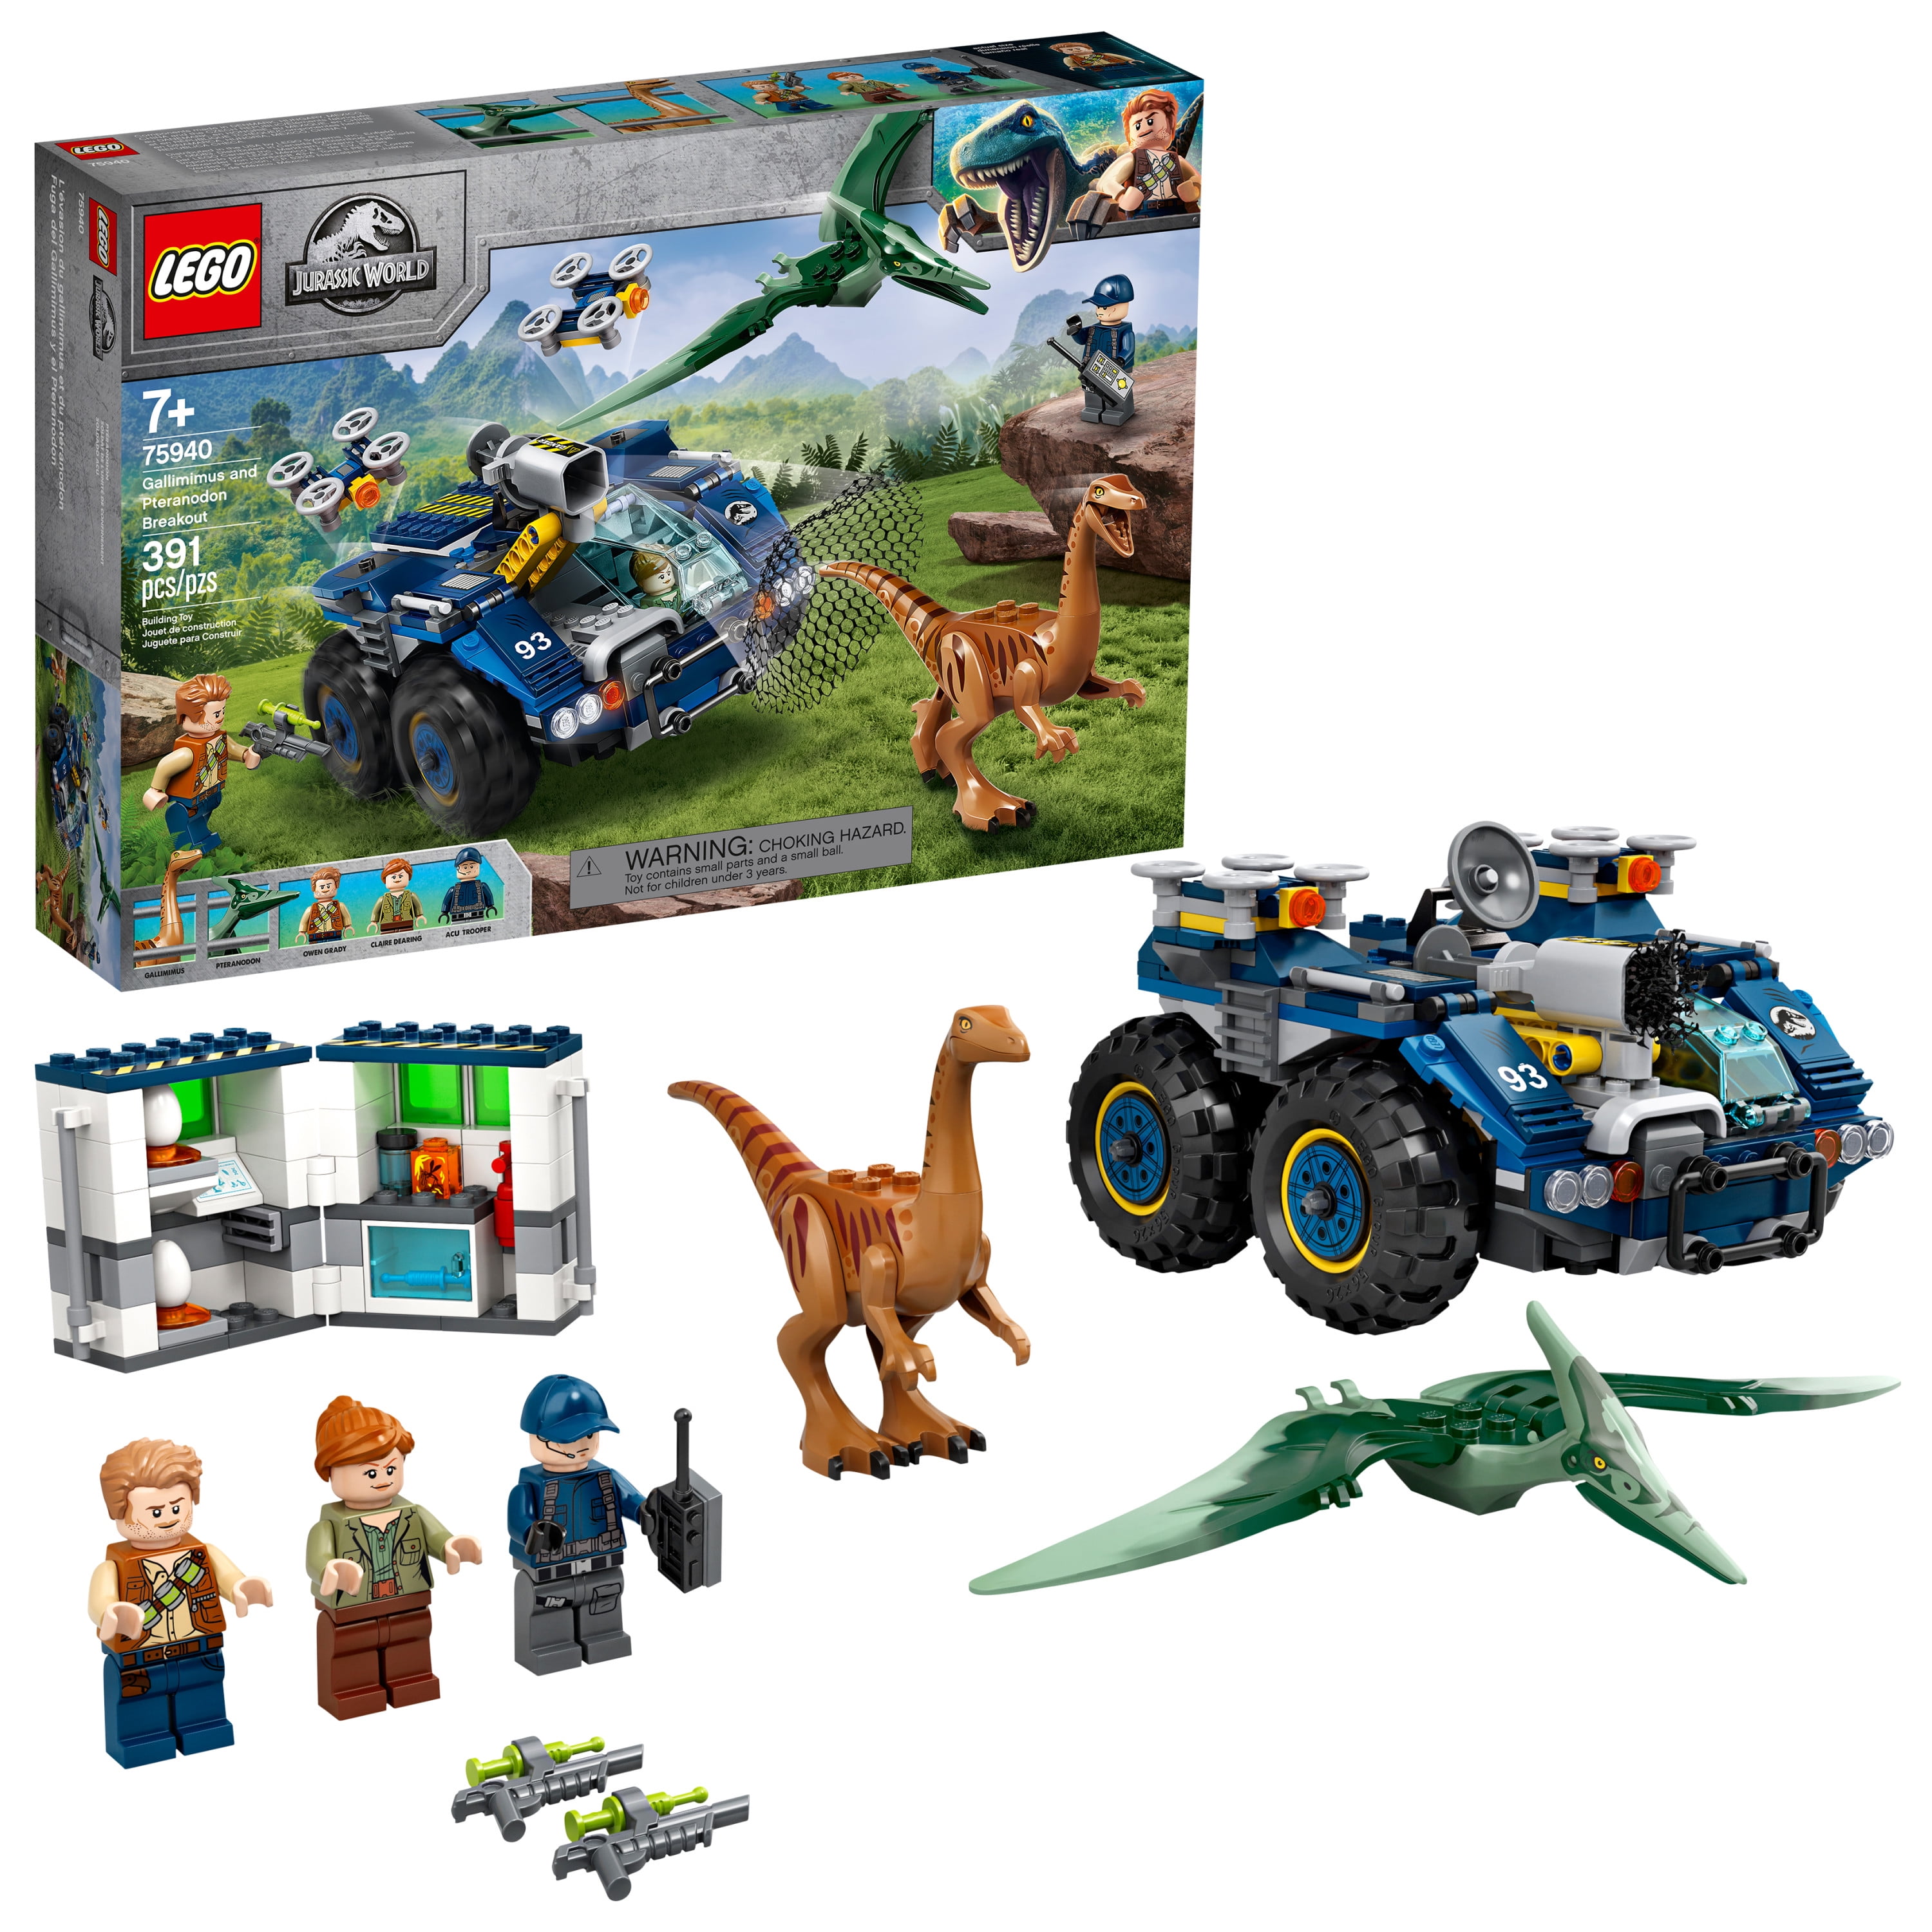 for sale online 75940 LEGO Gallimimus and Pteranodon Breakout Jurassic World